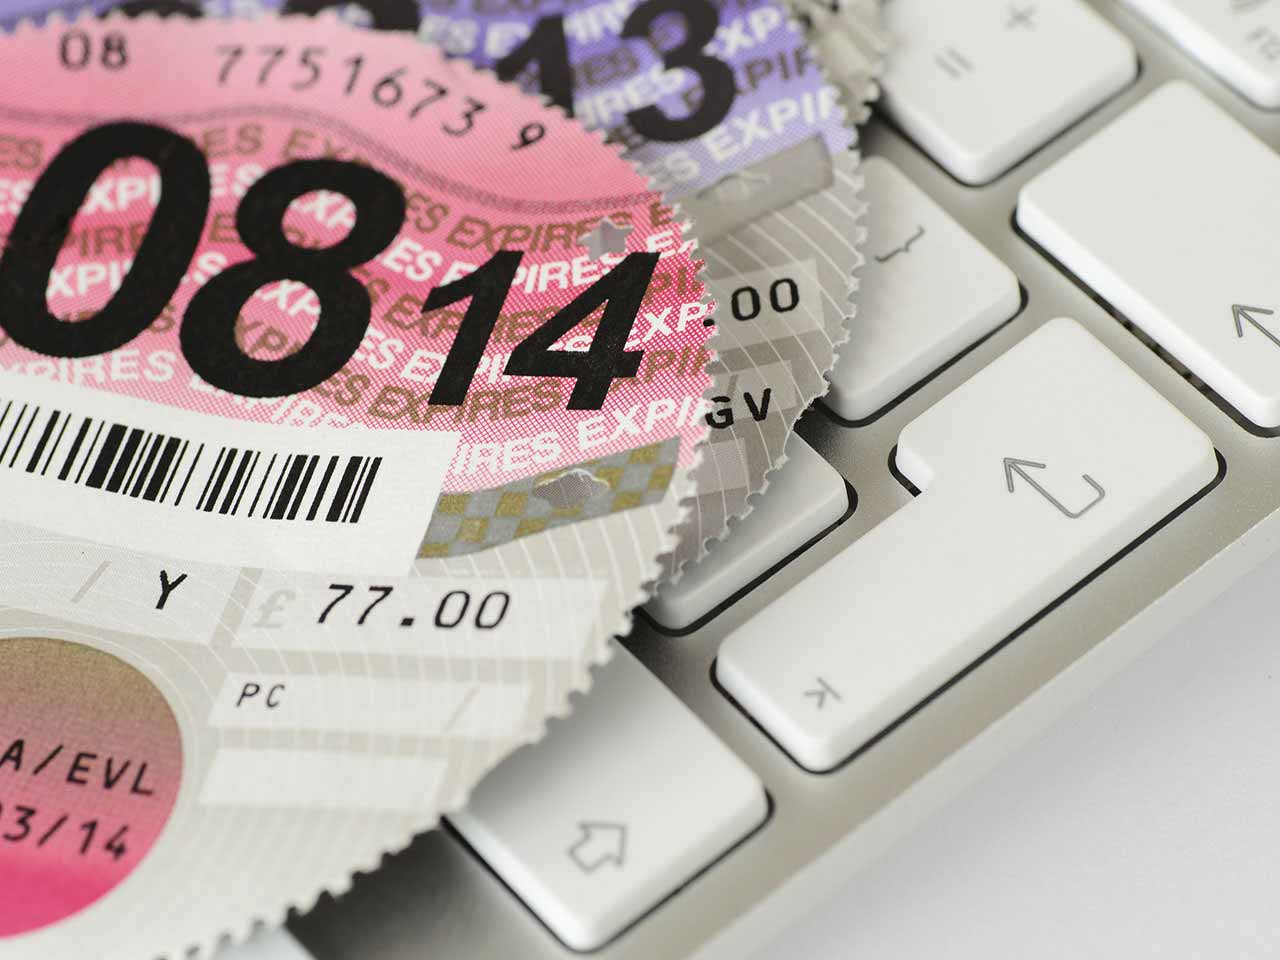 Road tax discs on a computer keyboard to represent the car tax refund email scam